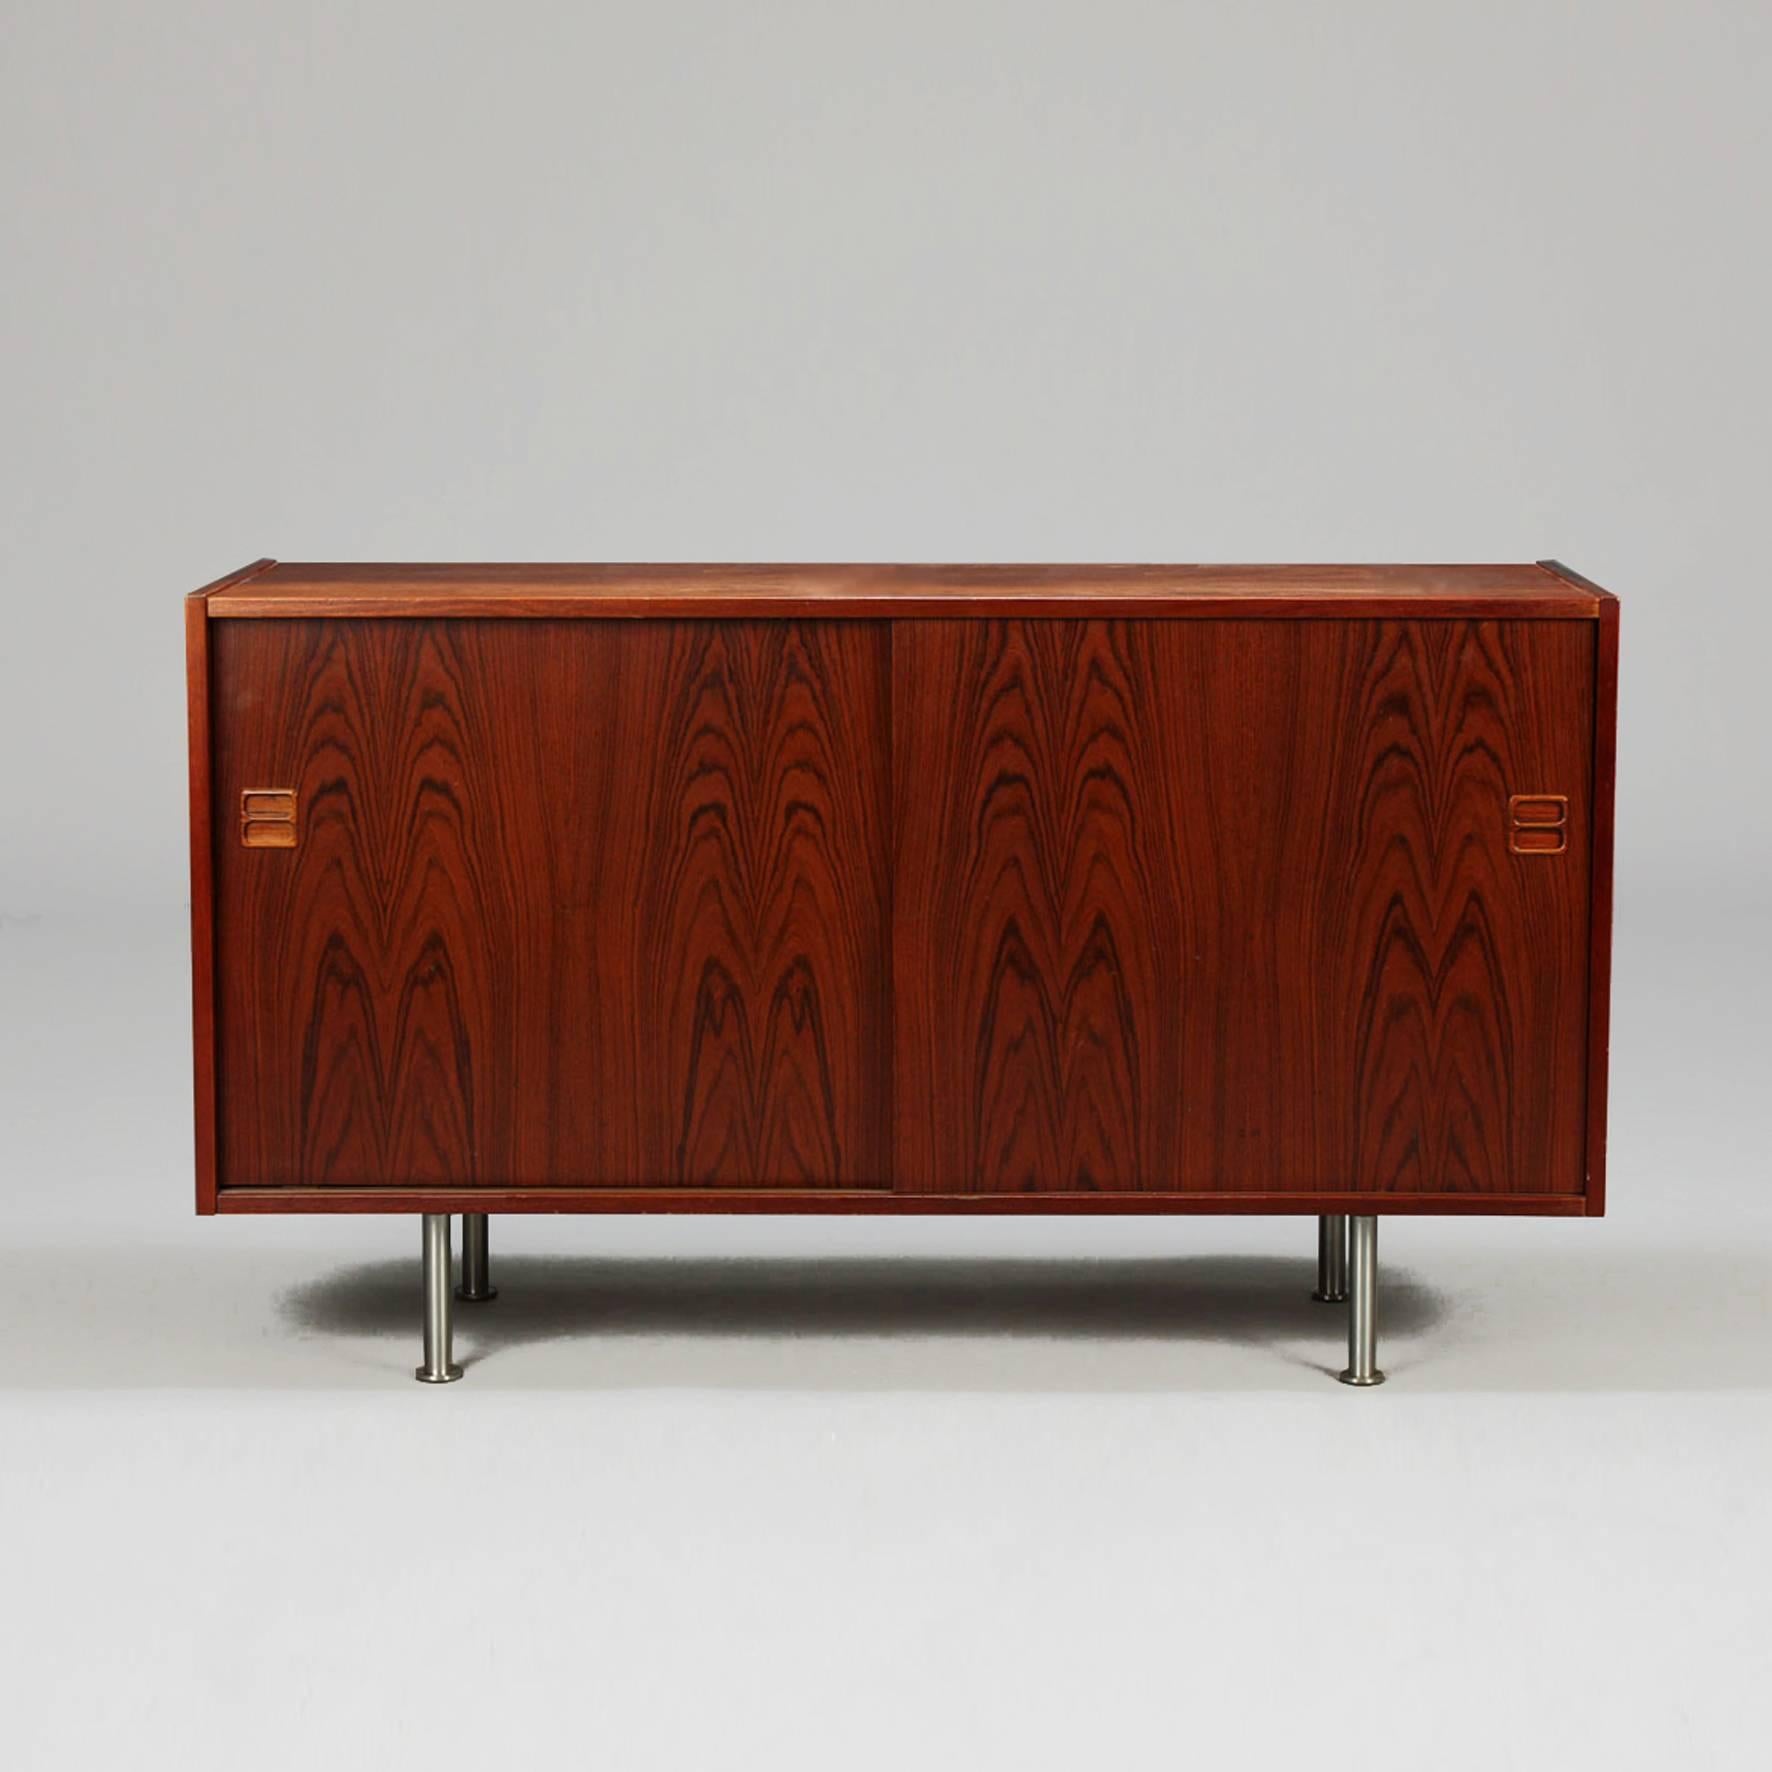 
Anpalisander sideboard of rectangular shape opening by two sliding doors on a shelf on four round steel legs.
Denmark.
Circa 1960.